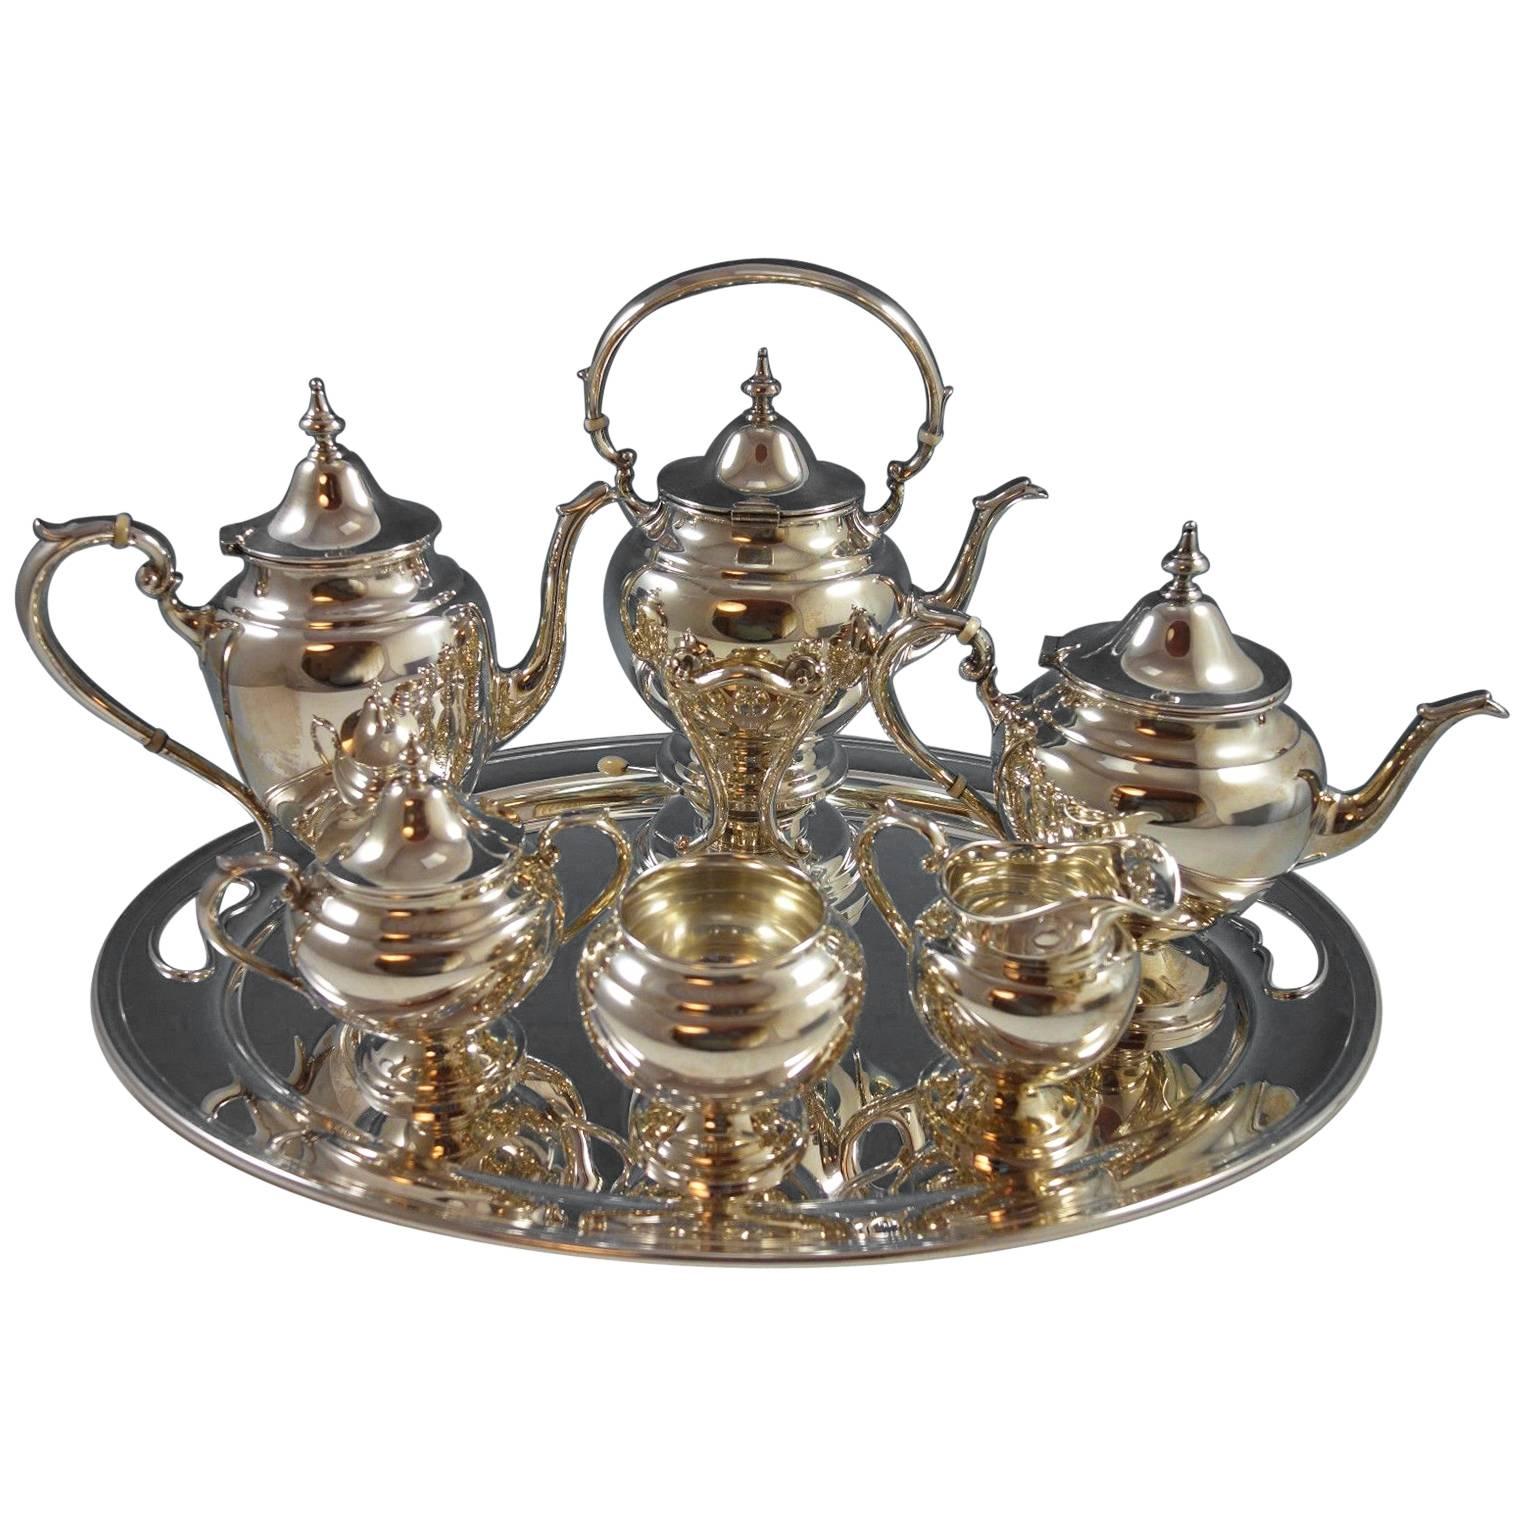 Puritan by Gorham Sterling Silver Tea Set Six-Piece Set with Tray, Hollowware